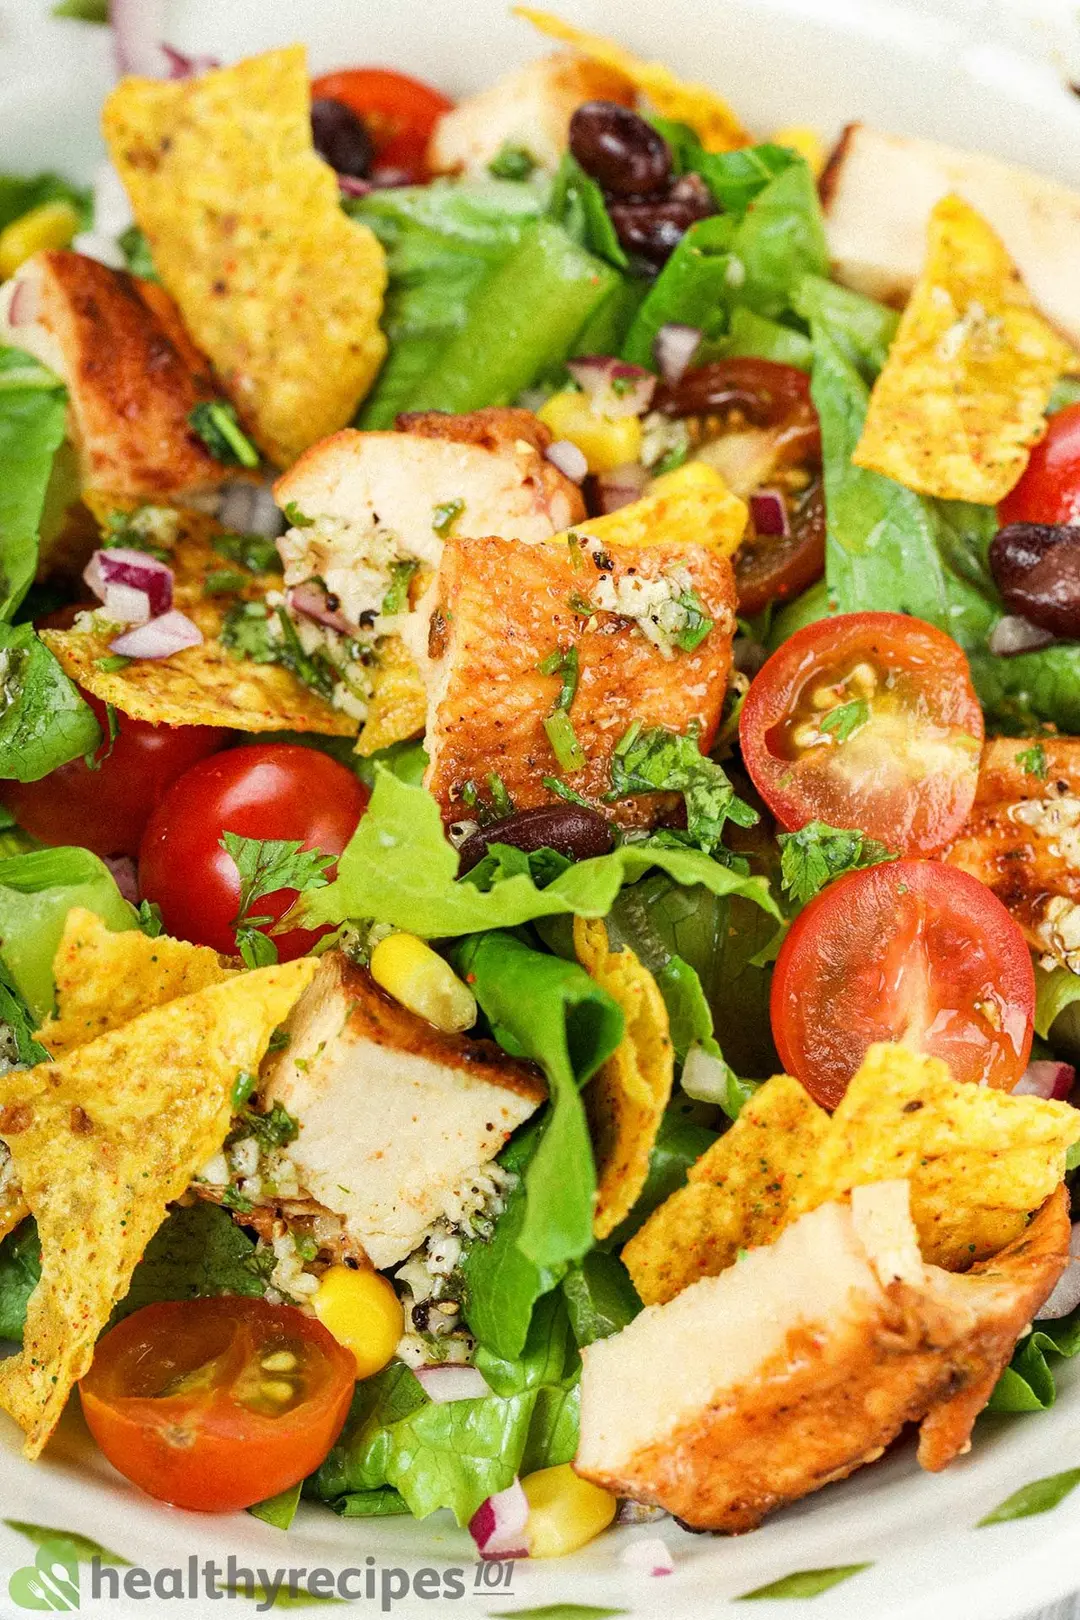 A close up on a chicken taco salad filled with cooked chicken pieces, dorioto chips, shredded lettuce, halved cherry tomatoes, and corn